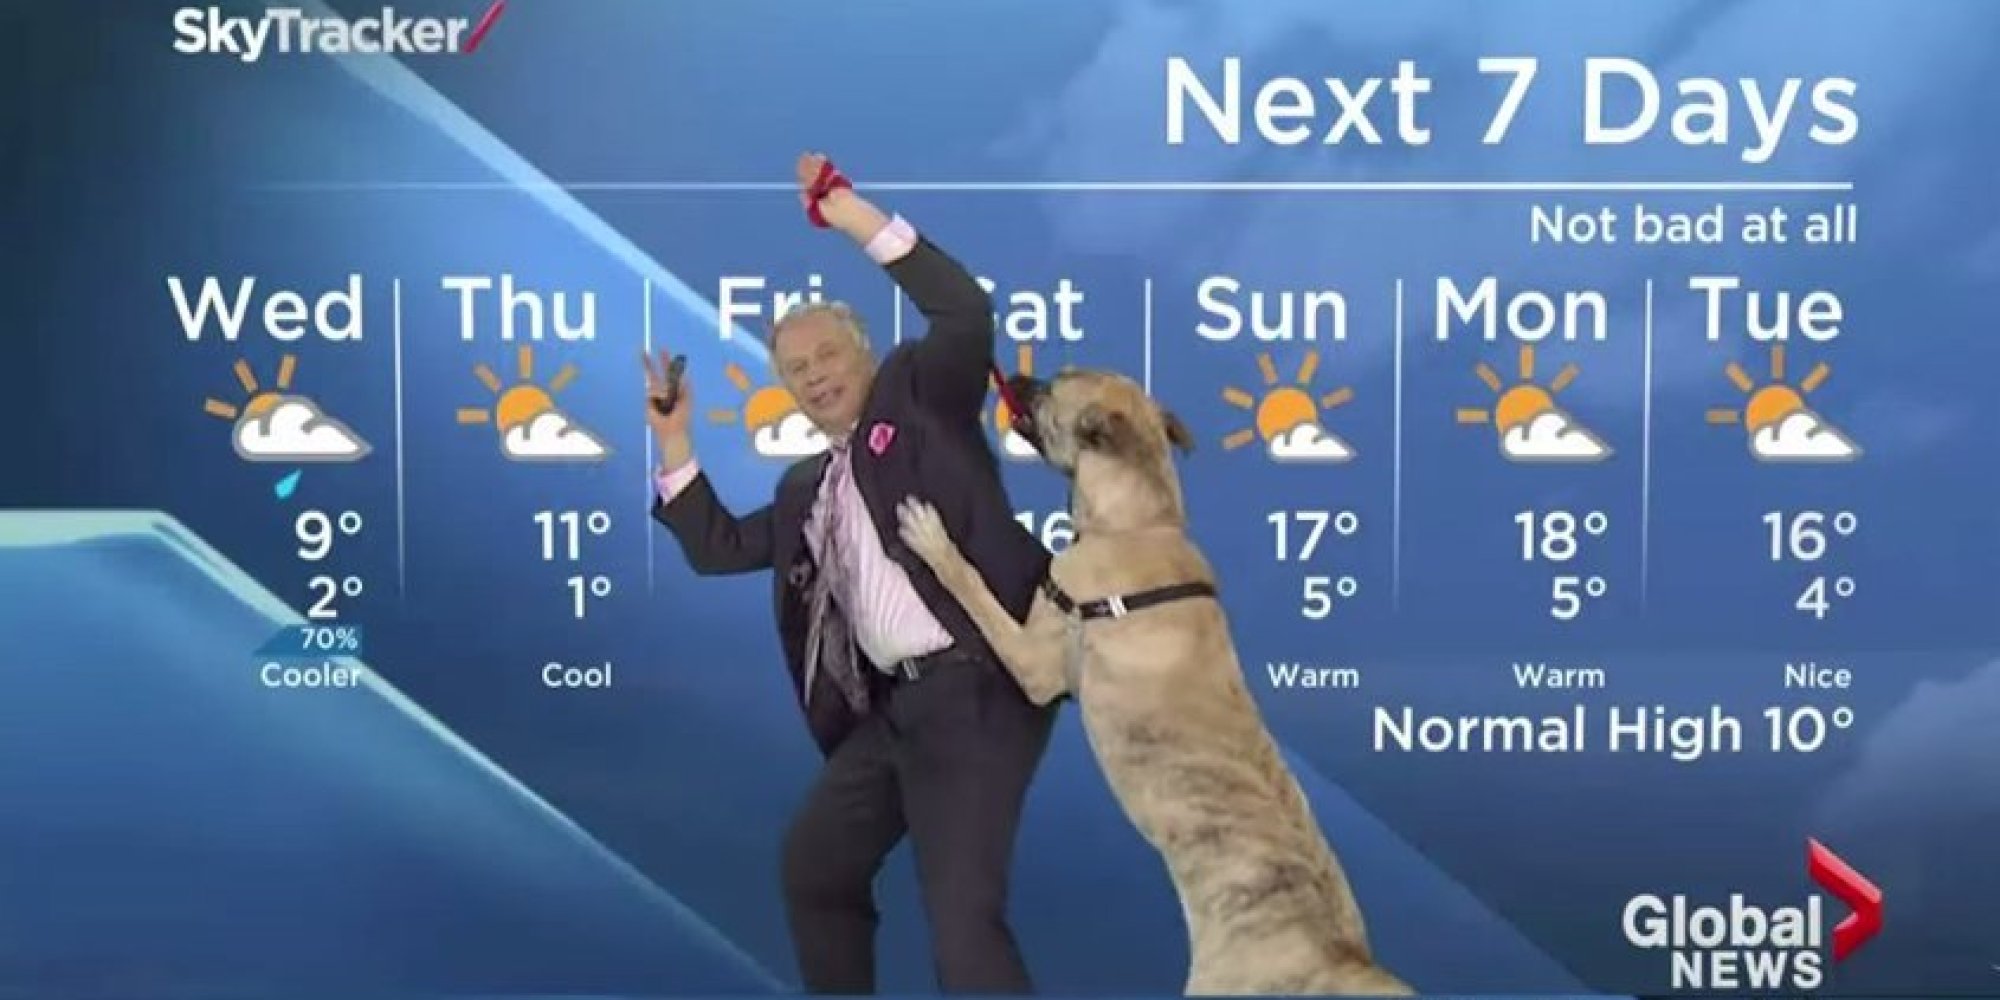 Canadian Weatherman Presents Forecast With A Dog, Dog Completely Takes